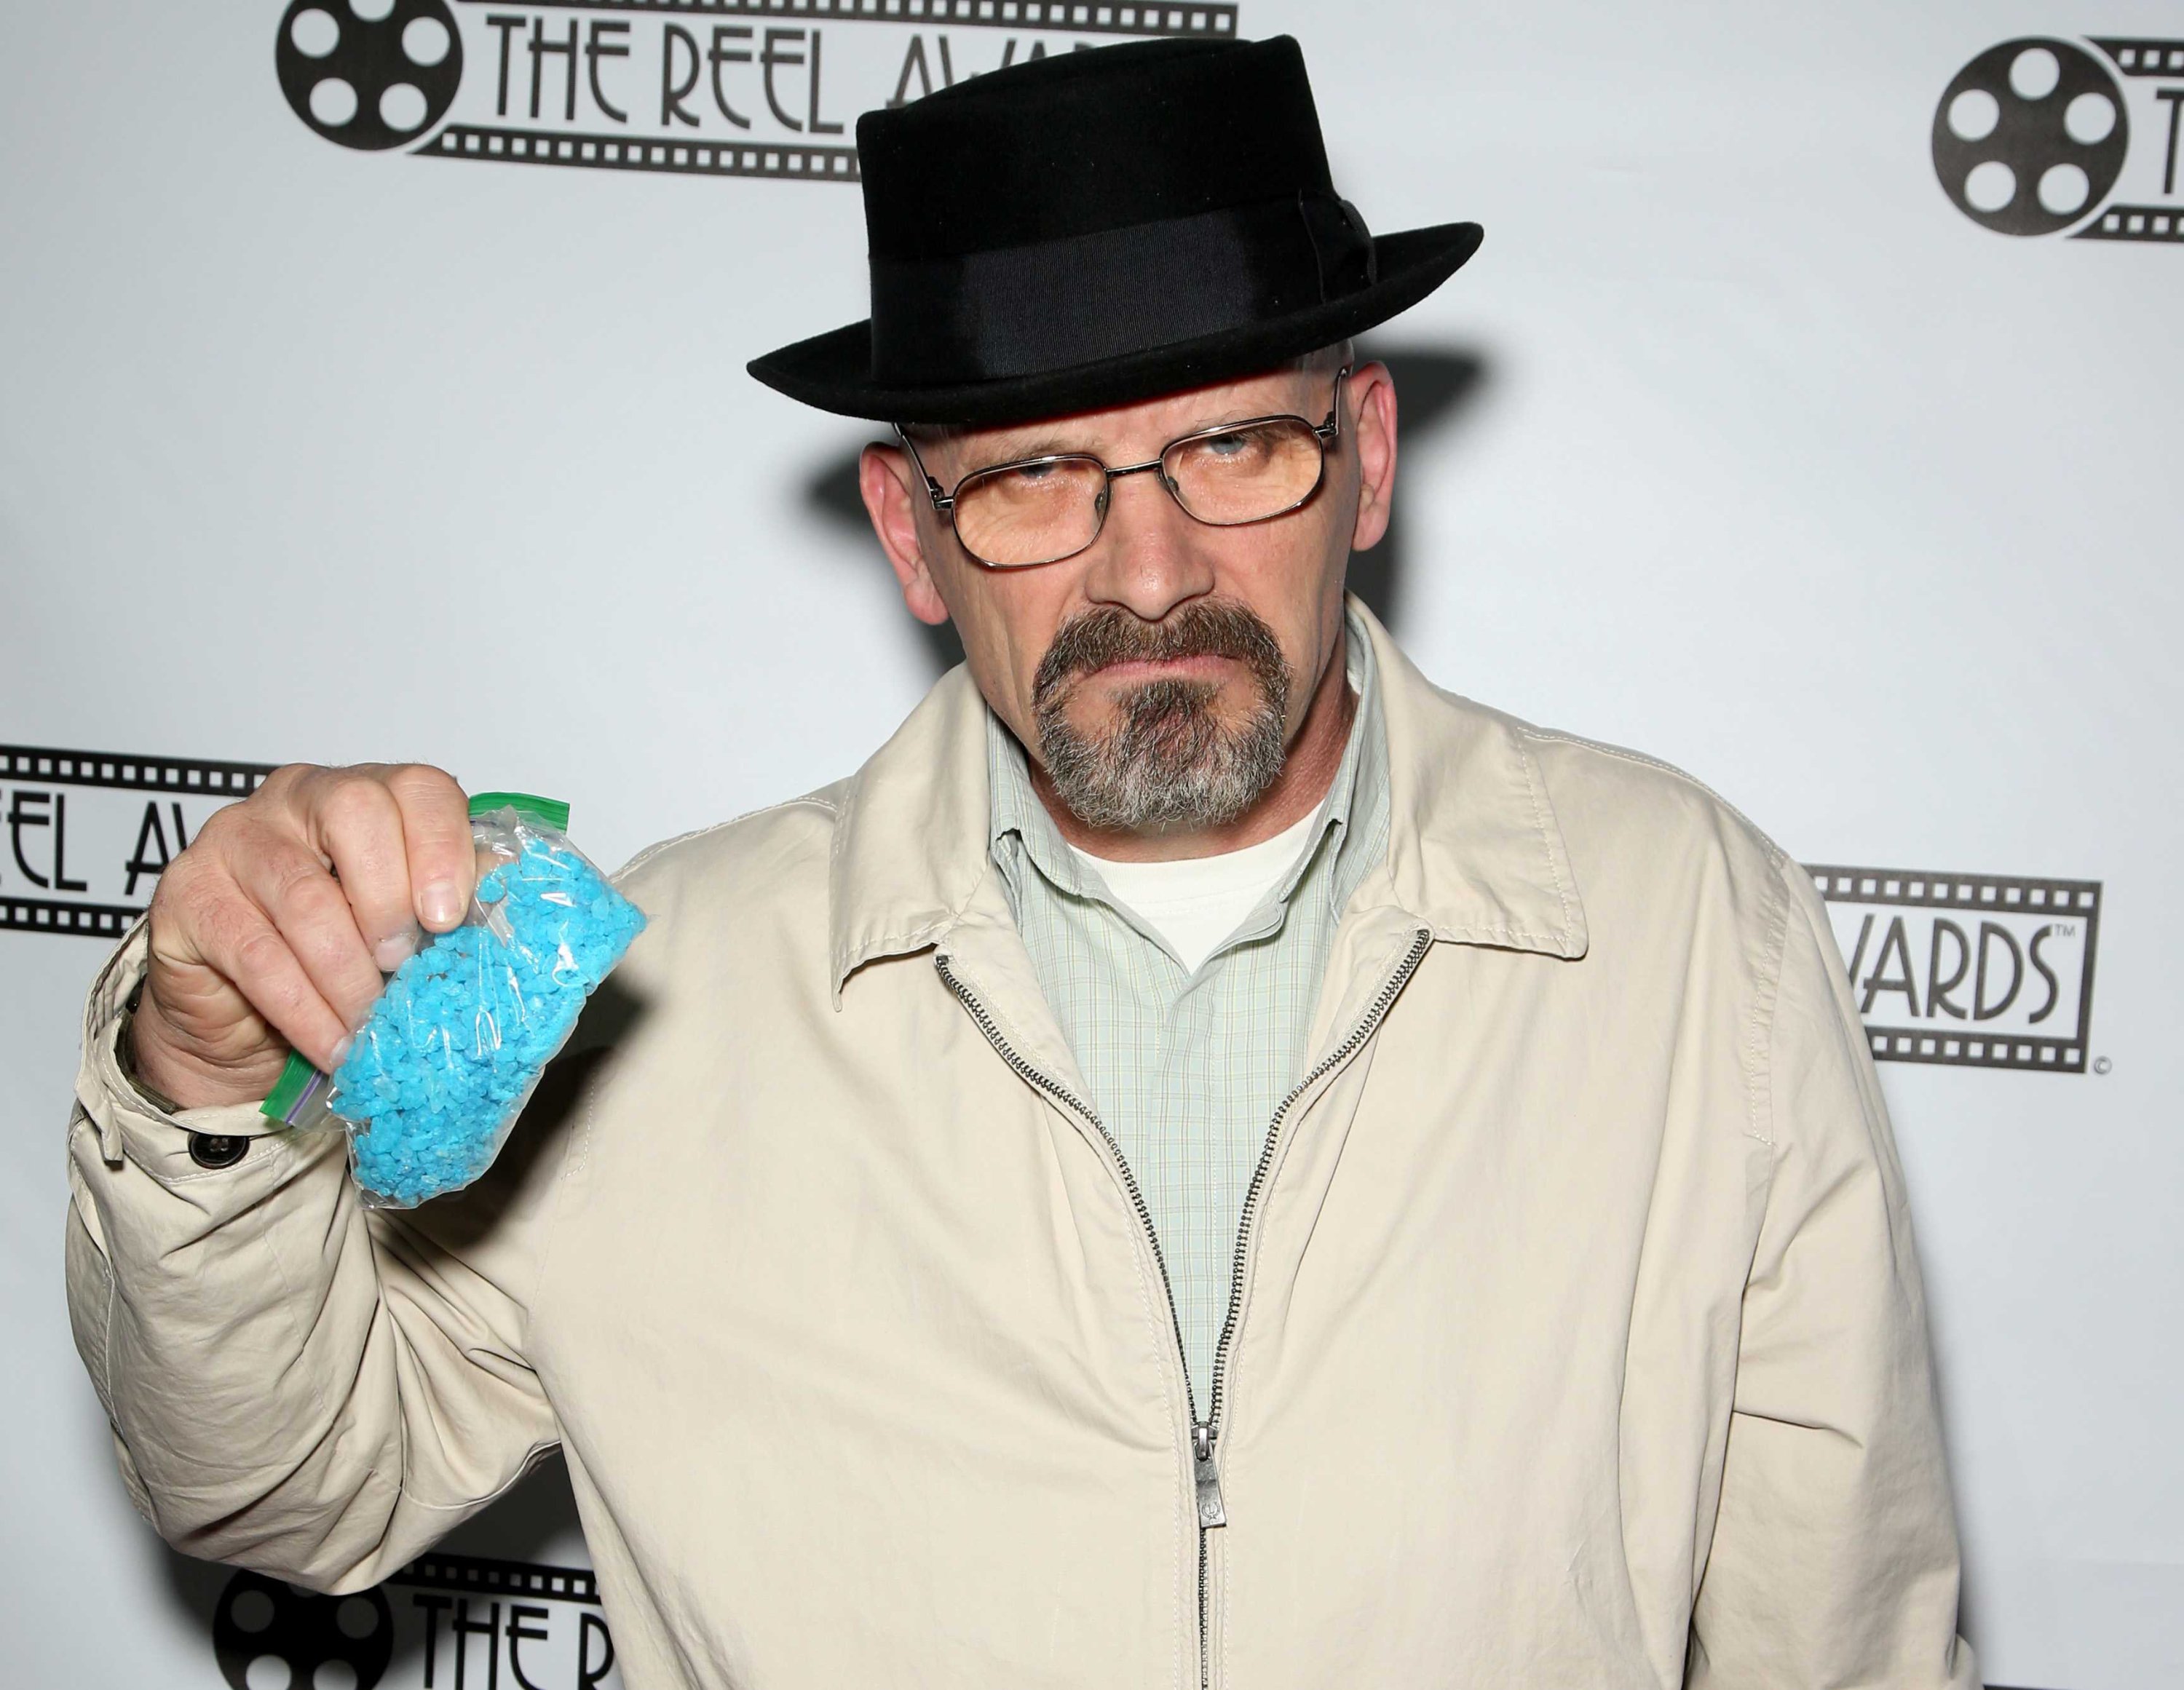 Jamie Pagett of the United Kingdom, dressed as the character Walter White from the television series 'Breaking Bad,' attends The Reel Awards 2020 at Marilyn's Lounge inside the Eastside Cannery Casino Hotel, in Las Vegas, Nevada, Feb. 20, 2020. (Getty Images)